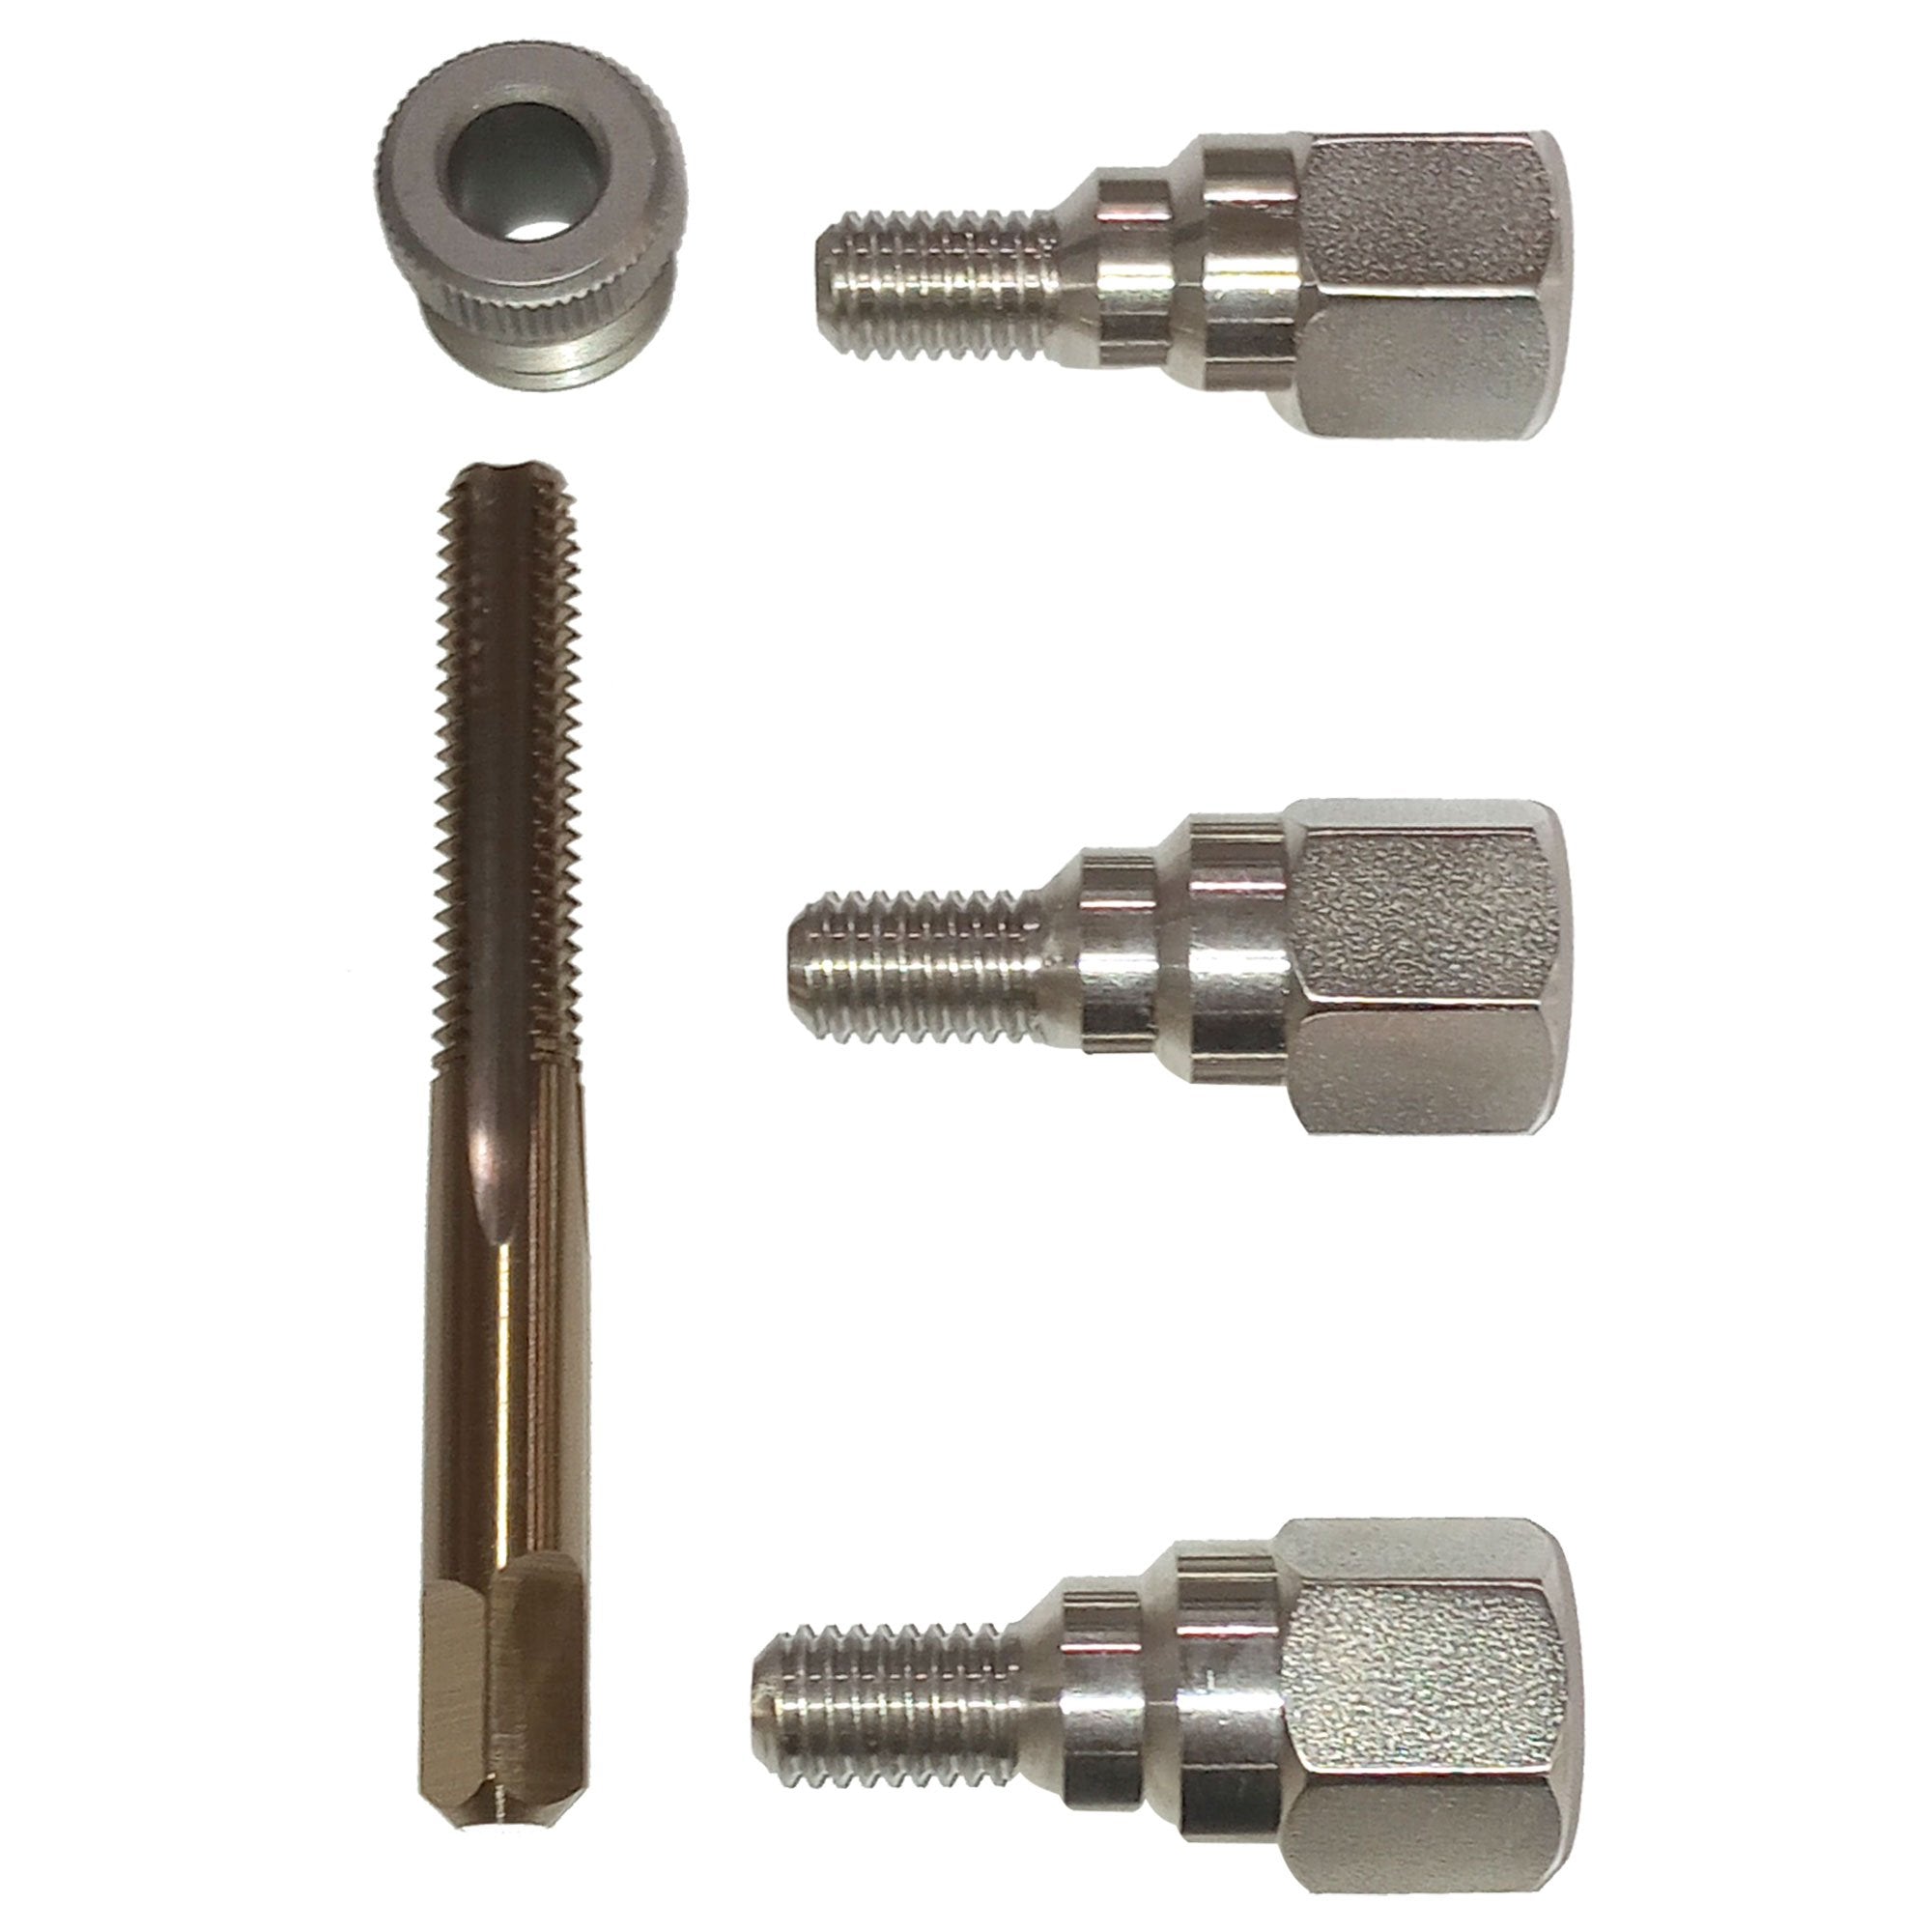 BULLIT Enhancement Kits for 10mm x 150 Adapts to Other In-Line Broken Bolt Repair Sizes